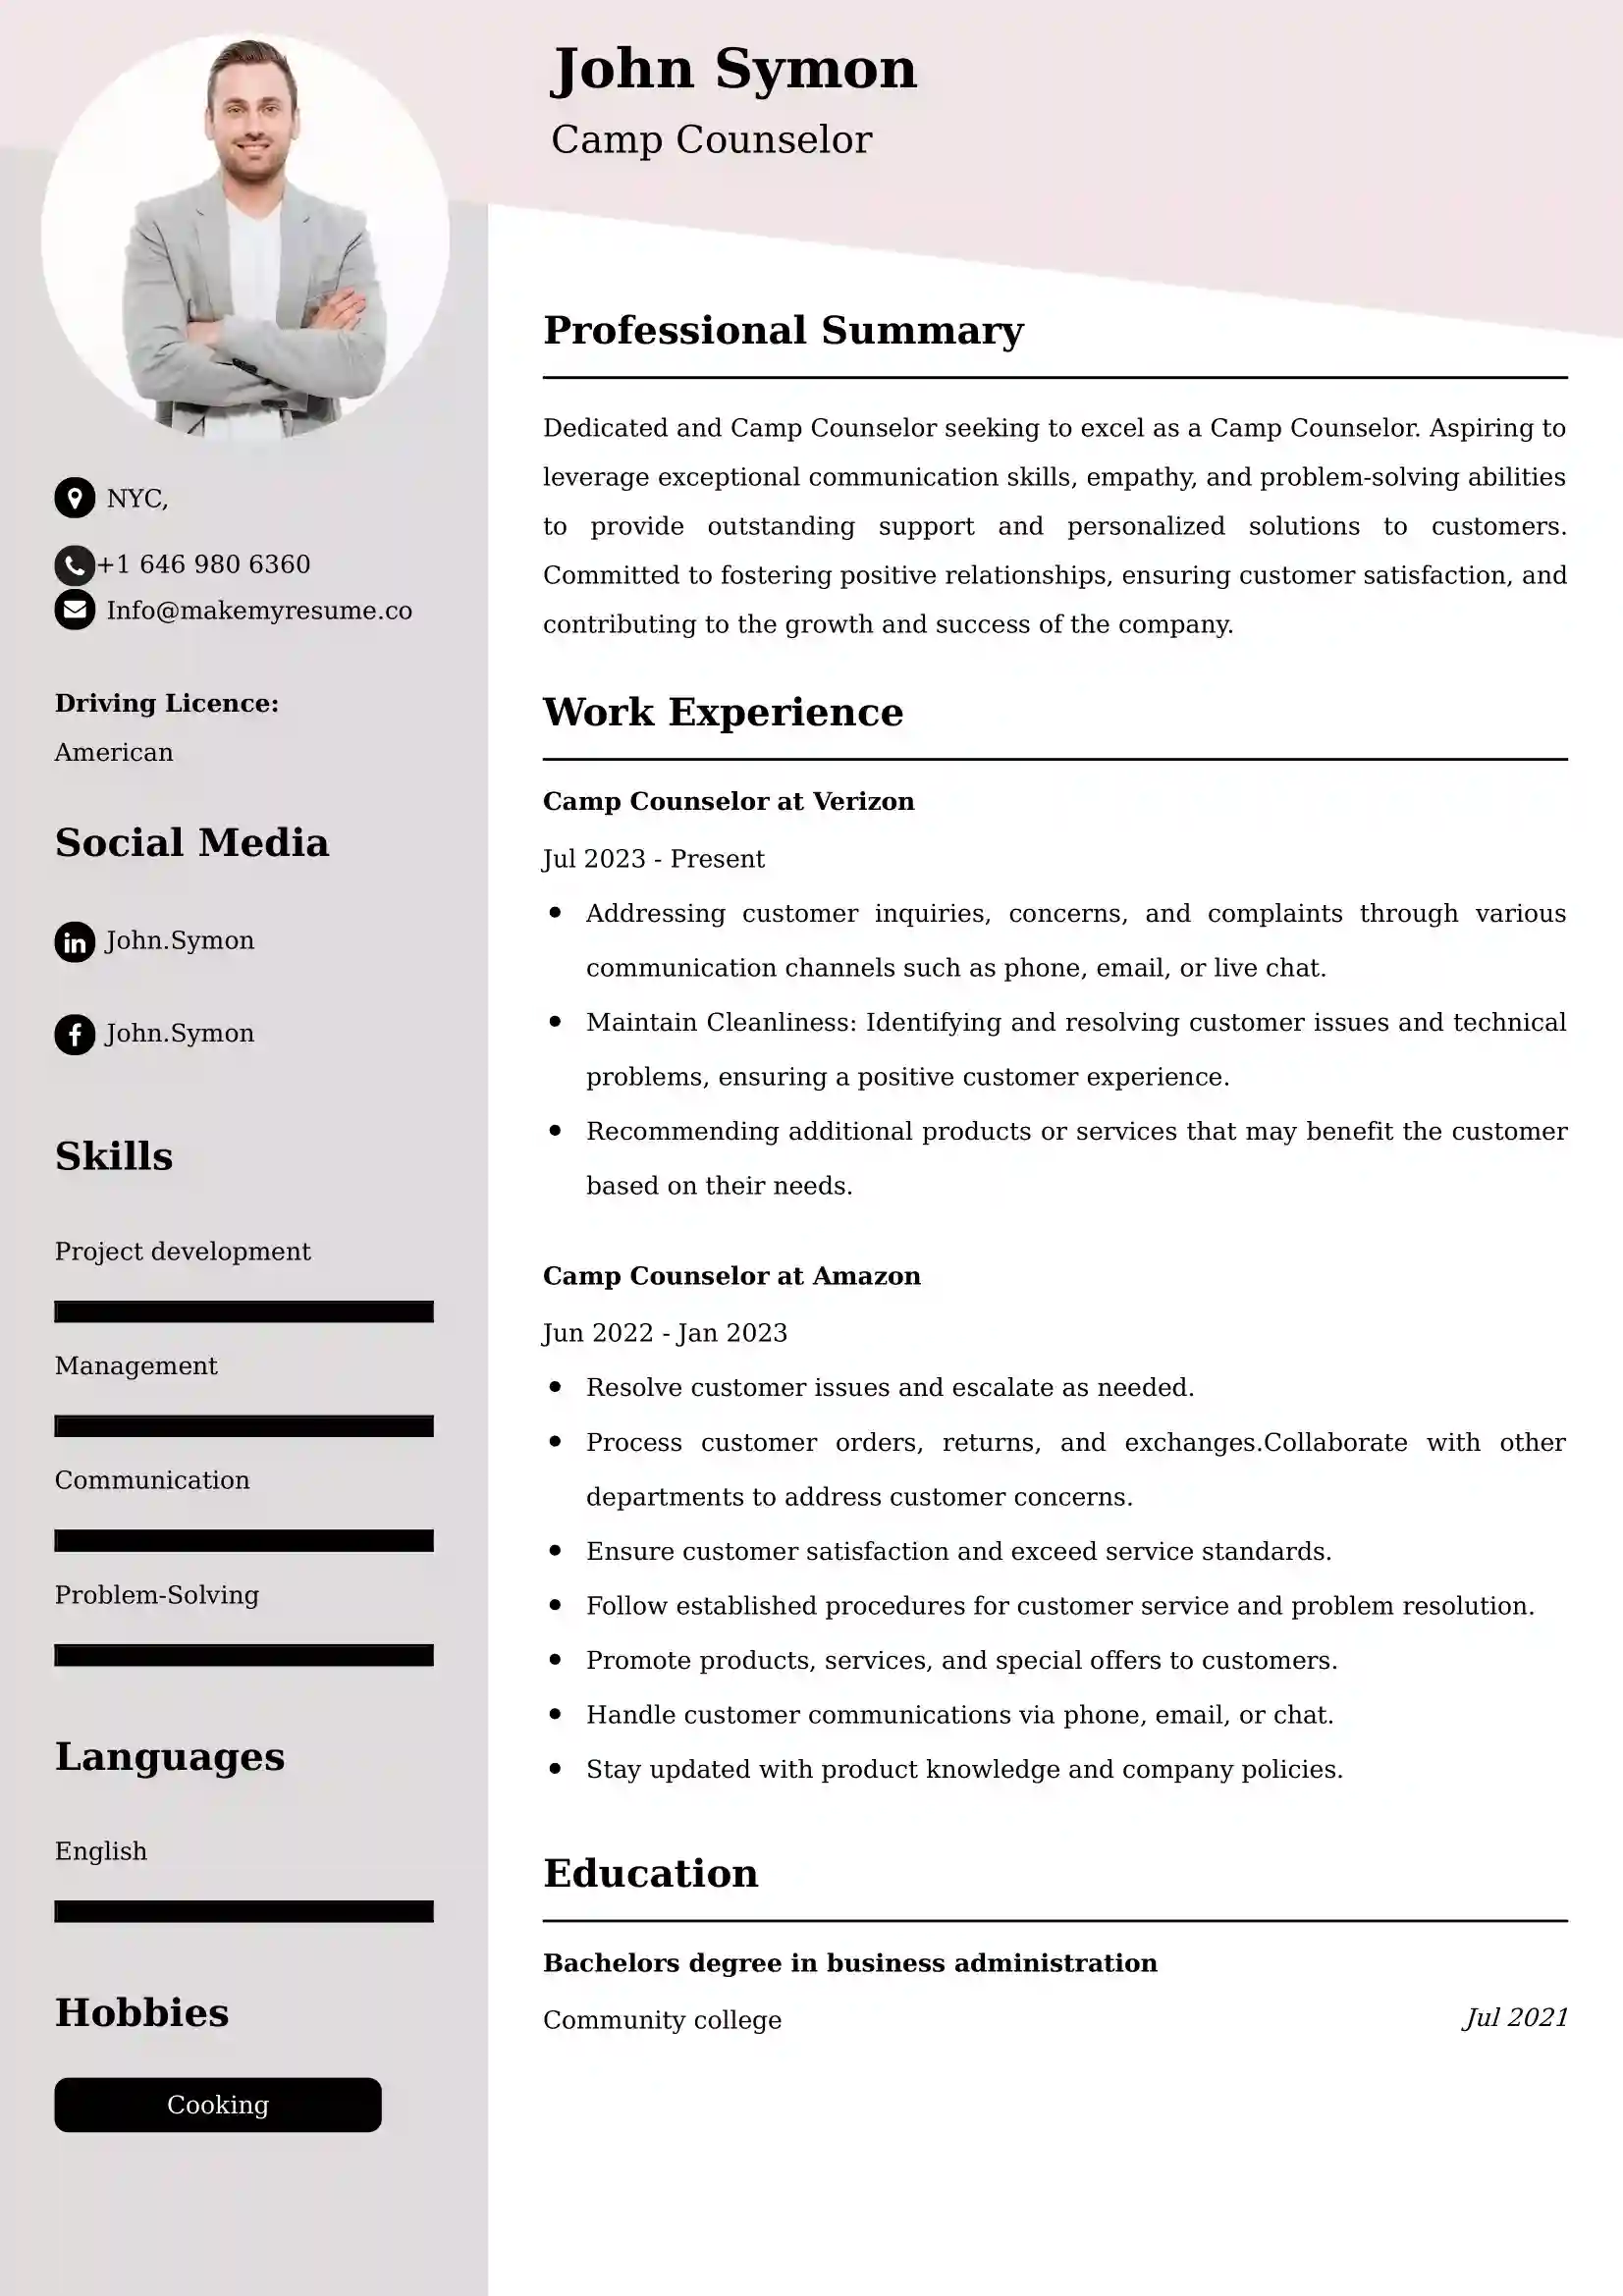 Camp Counselor Resume Examples - Brazilian Format, Latest Template